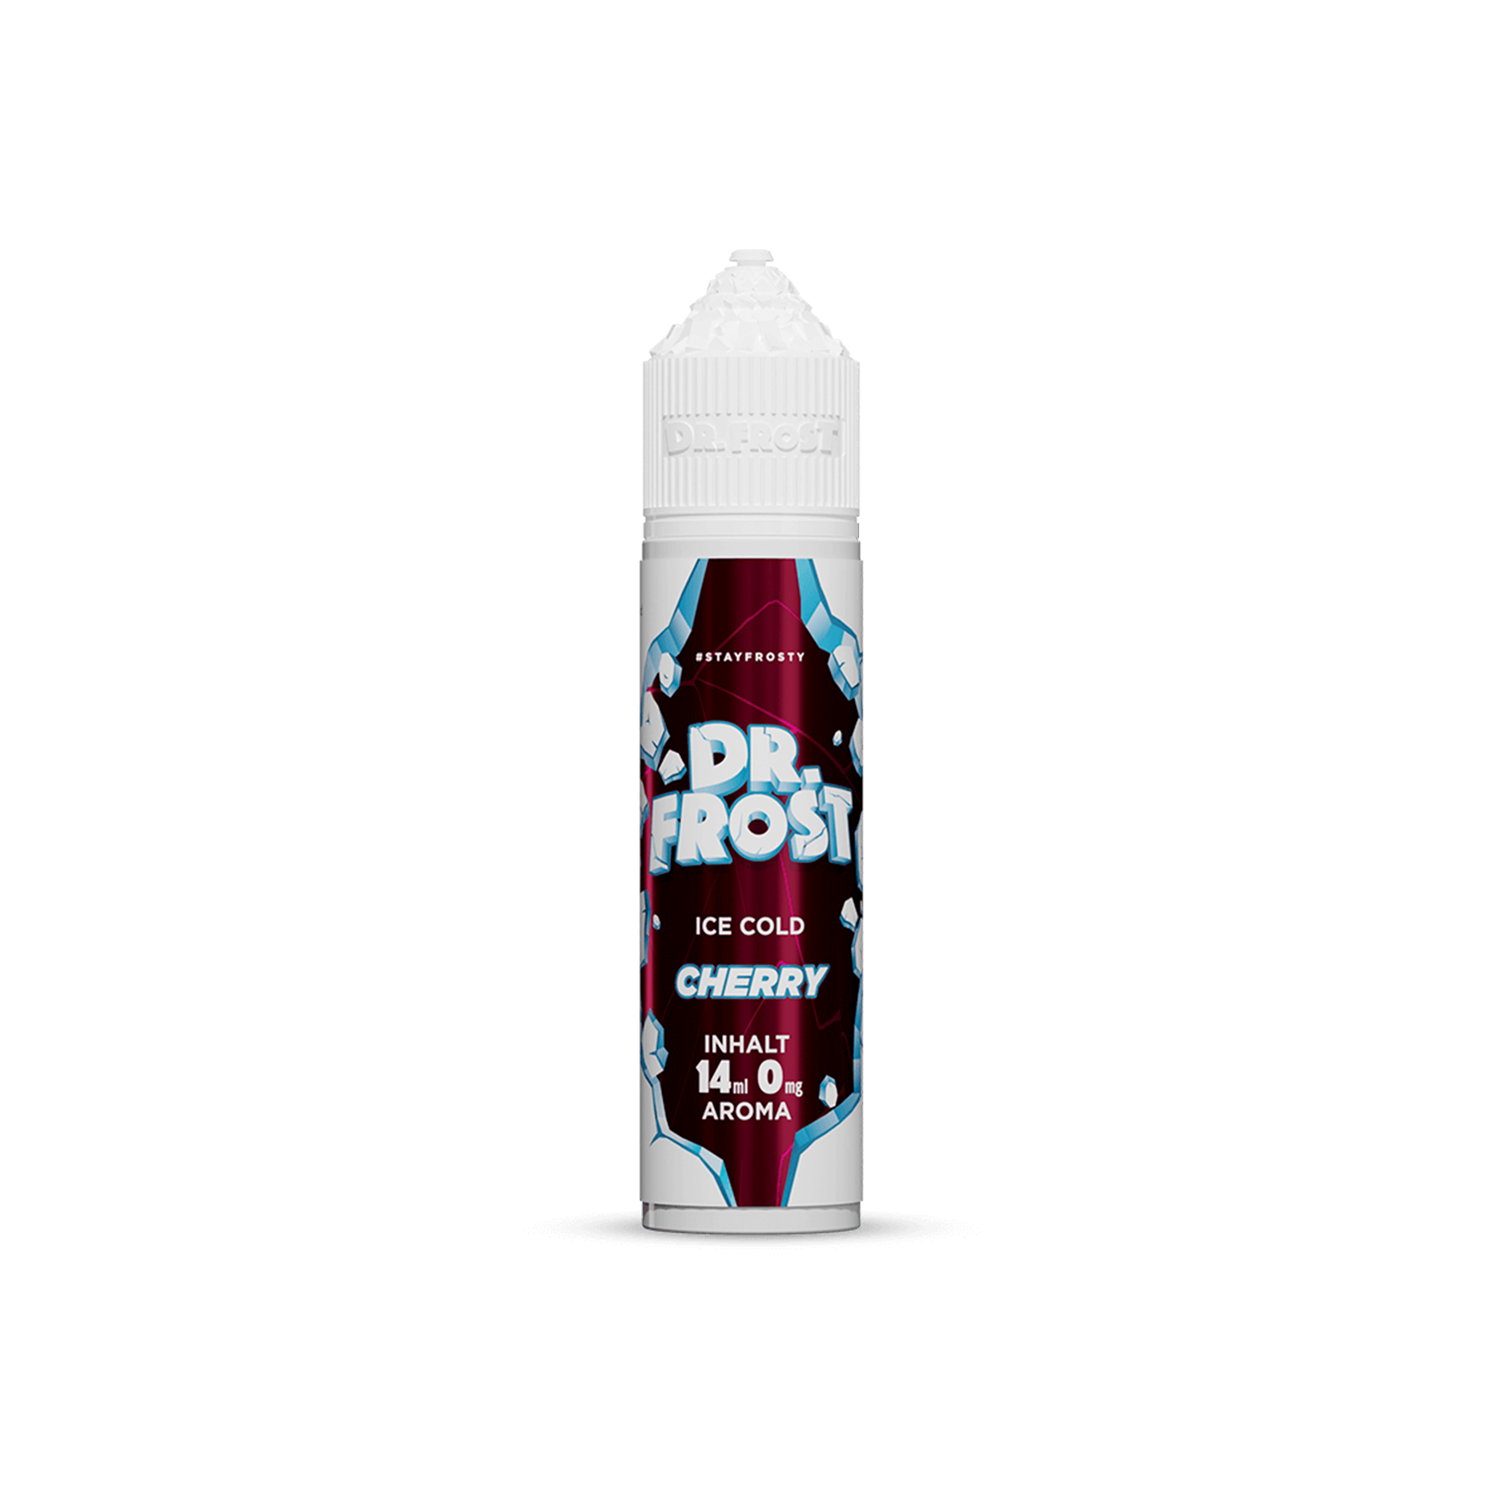 Dr. Frost - Ice Cold - Cherry 14ml Aroma 